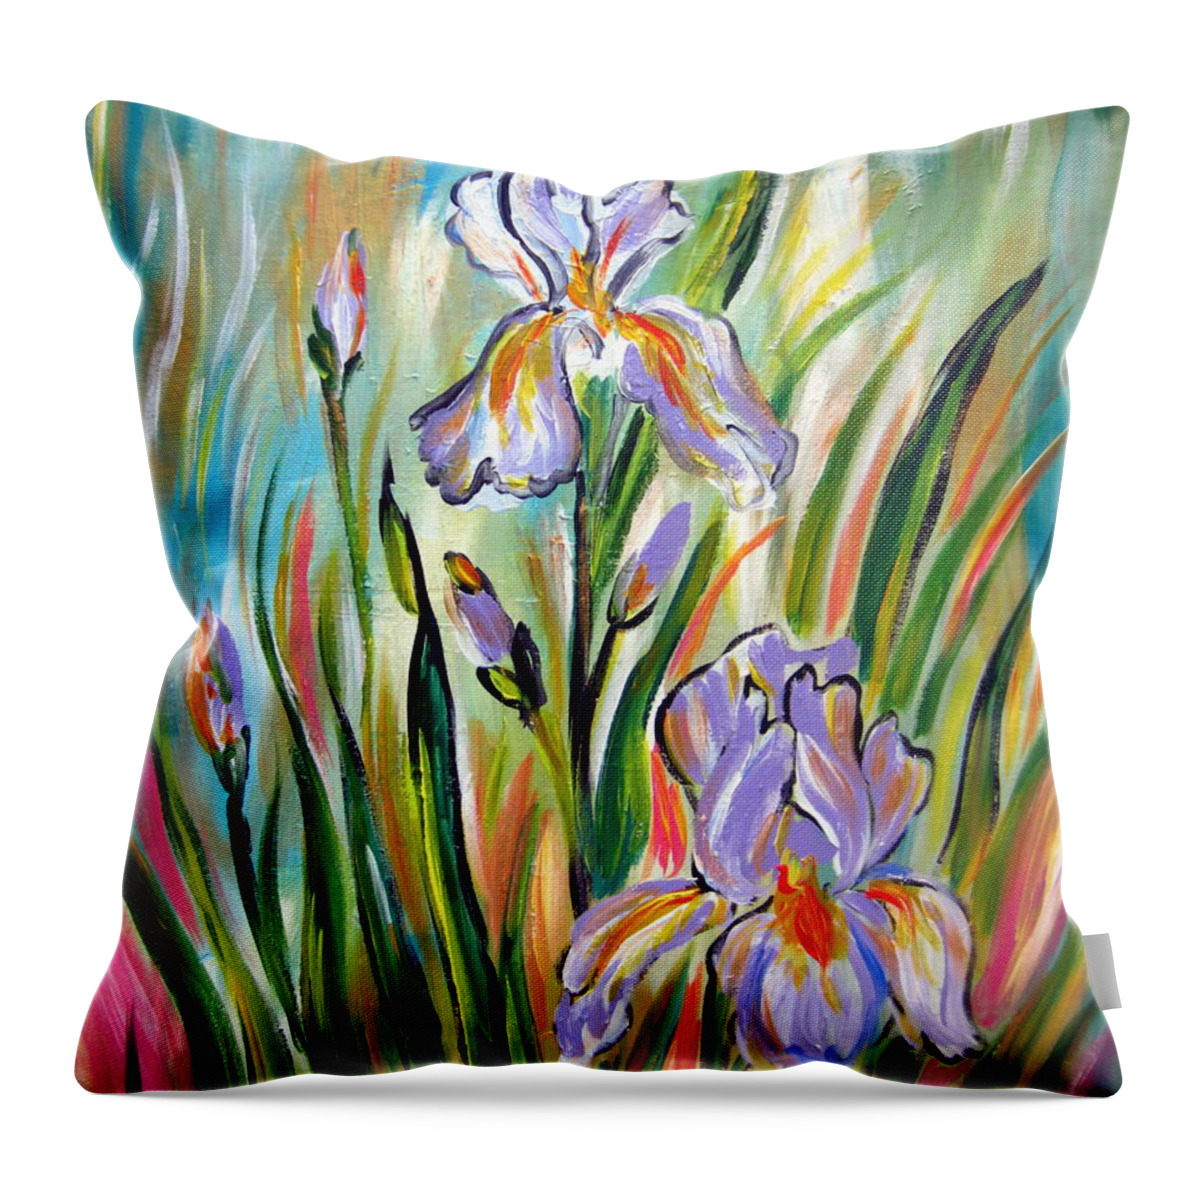 Irises Flowers Throw Pillow featuring the painting New Irises by Roberto Gagliardi